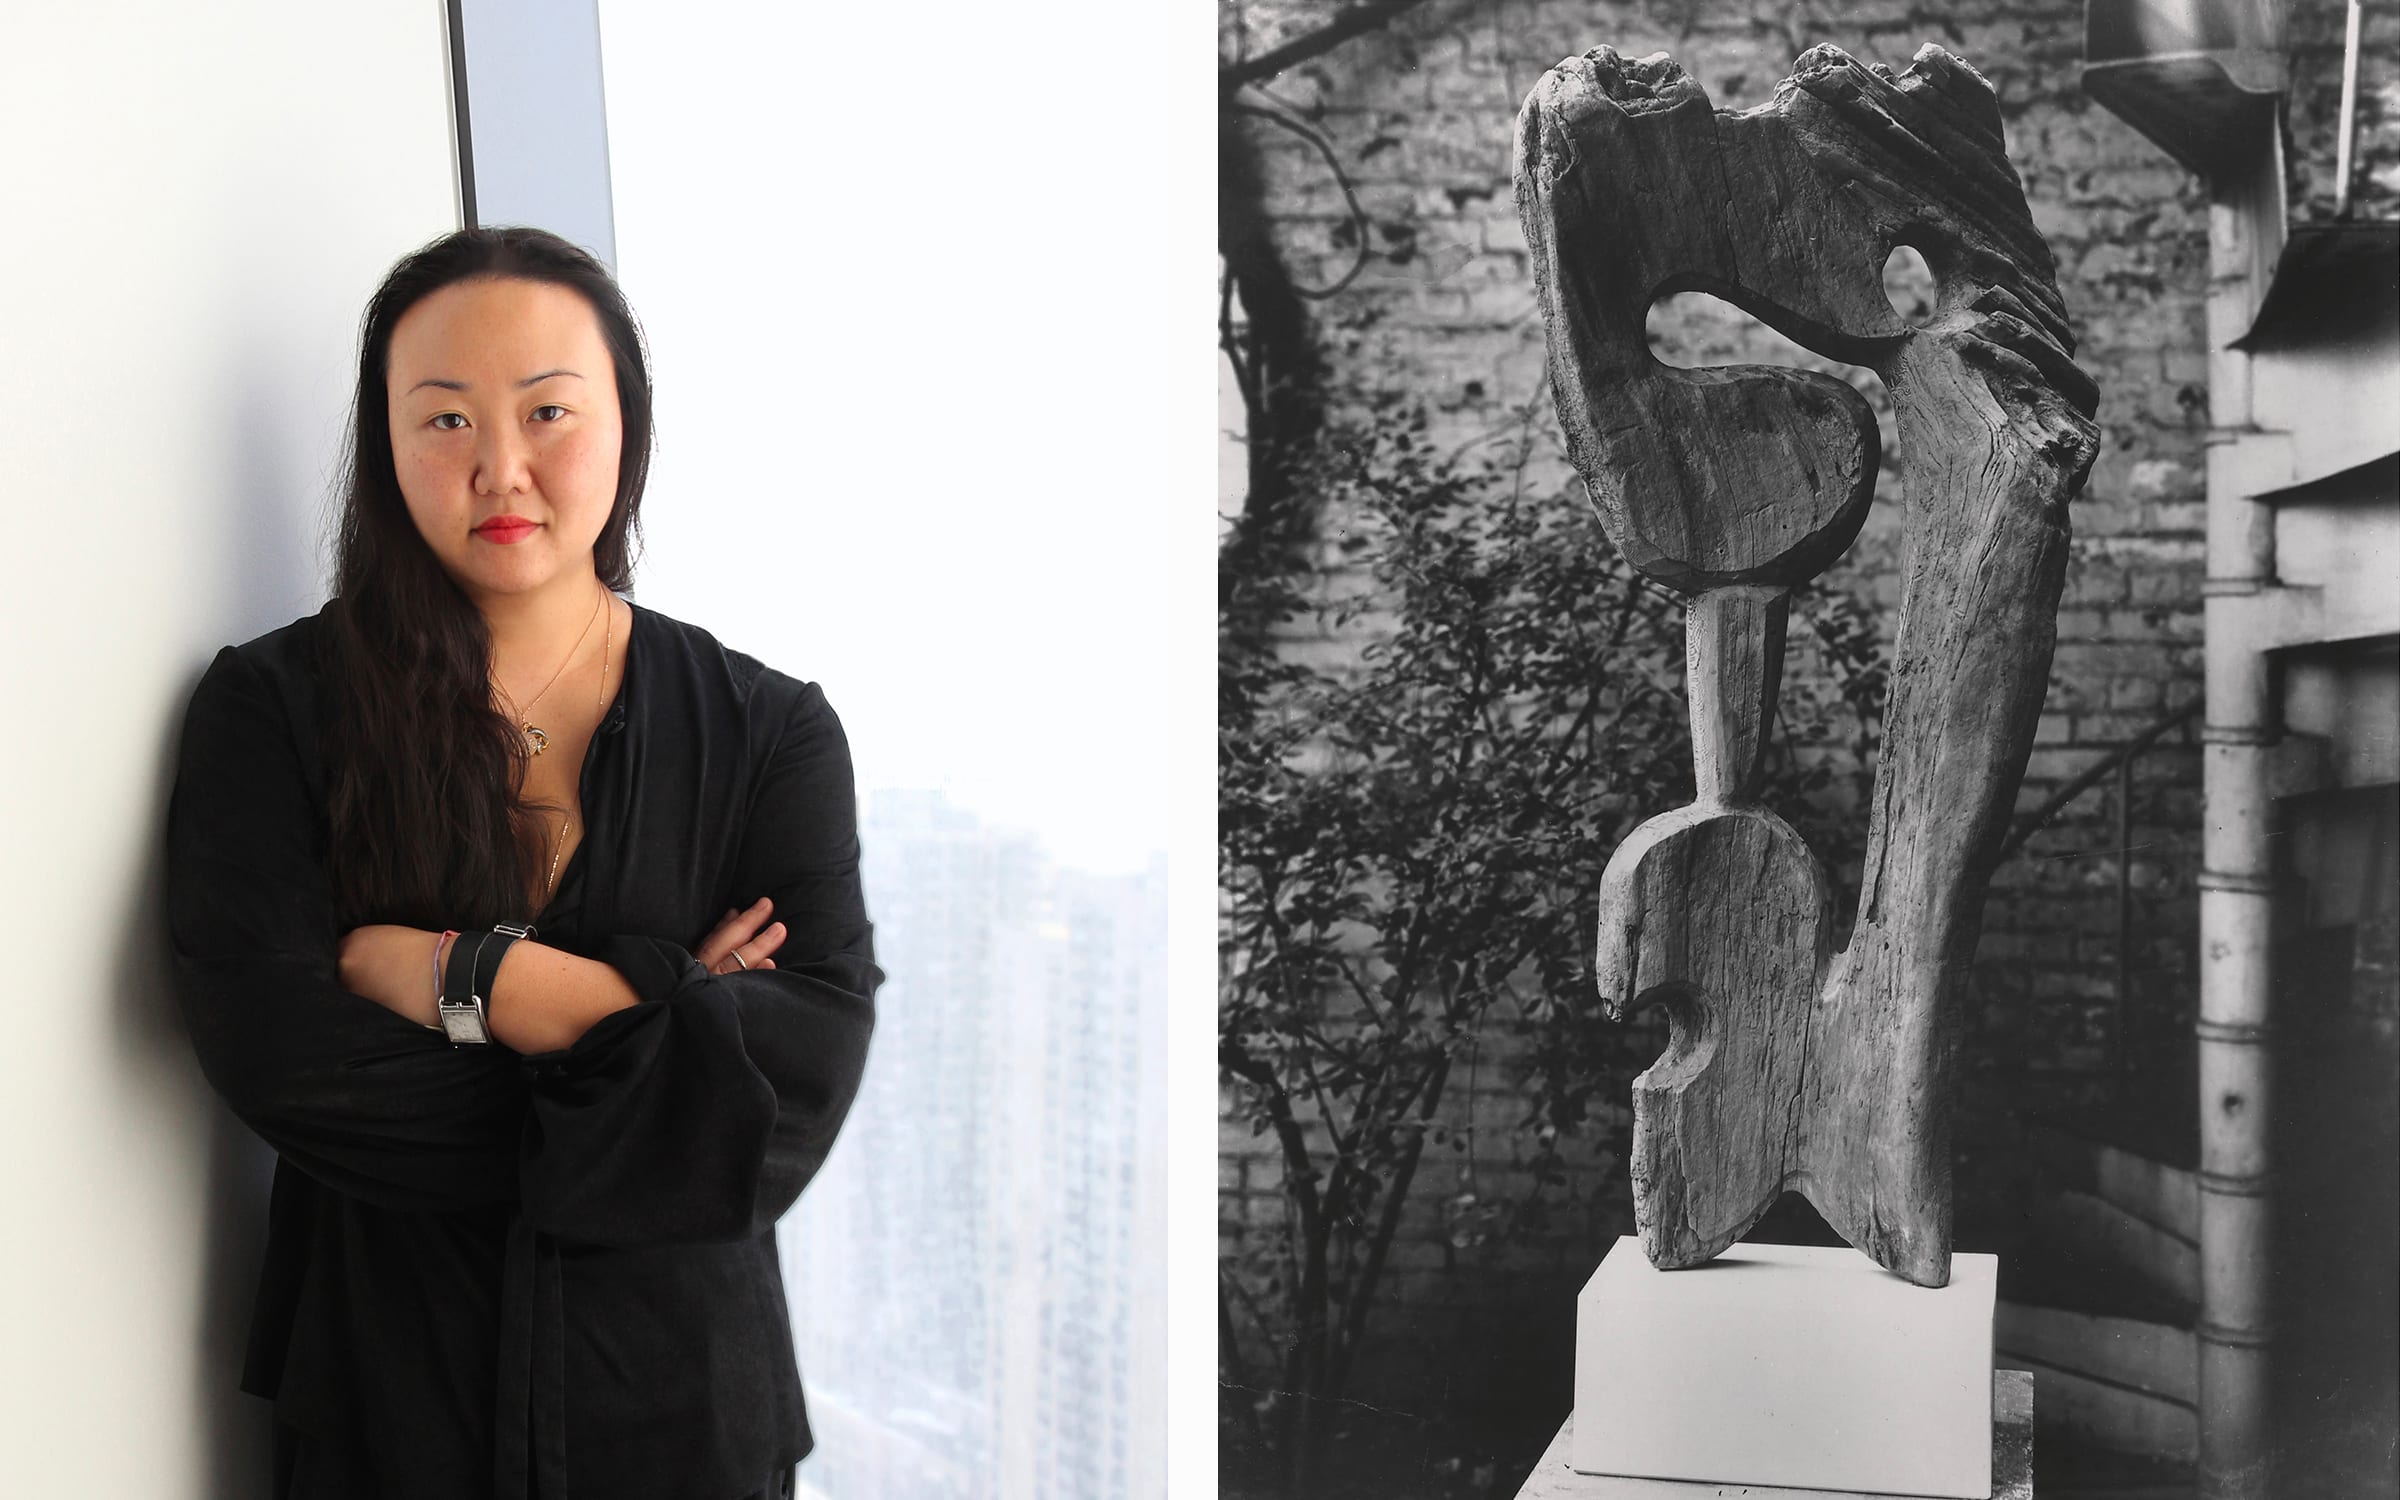 Left: Hanya Yanagihara. Photograph by Jenny Westerhoff. Right: Isamu Noguchi, My Pacific (Polynesian Culture), 1942. Collection of The Museum of Modern Art, New York; Florene May Schoenborn Bequest, 824.1996. Photo: The Noguchi Museum Archives, 01559. © The Isamu Noguchi Foundation and Garden Museum, New York / Artists Rights Society (ARS).